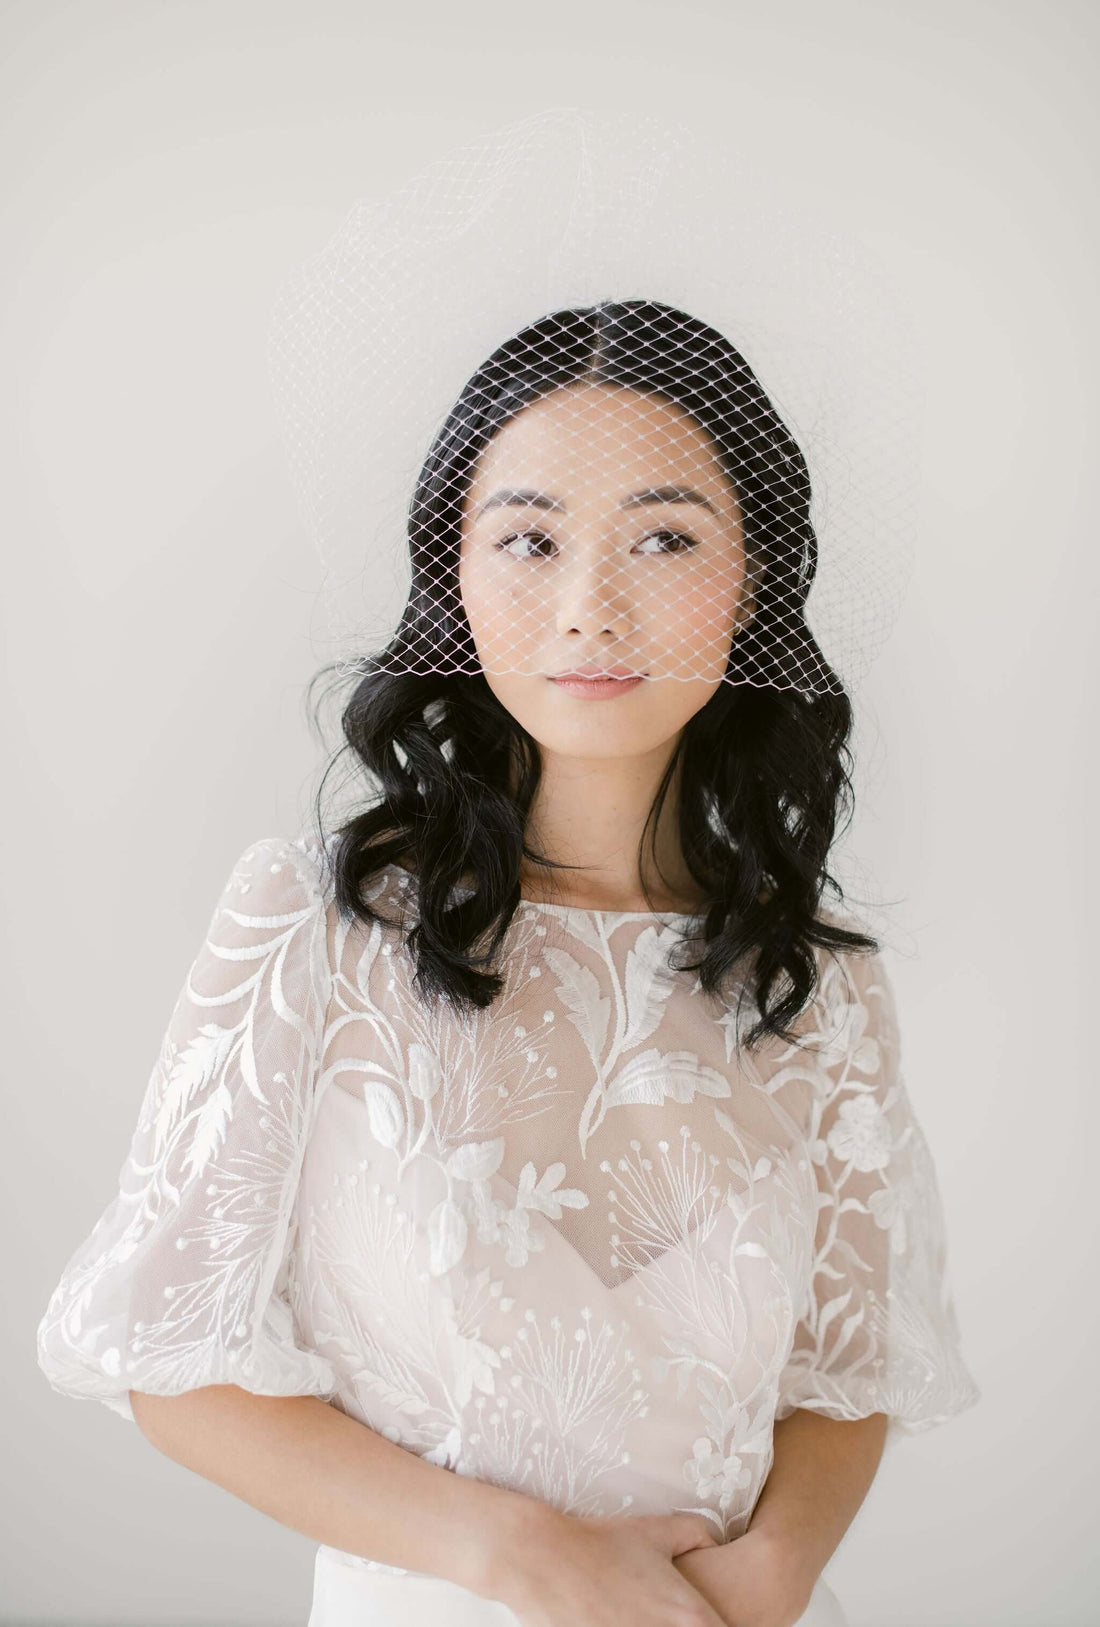 How do you keep a veil in place with your hair down?